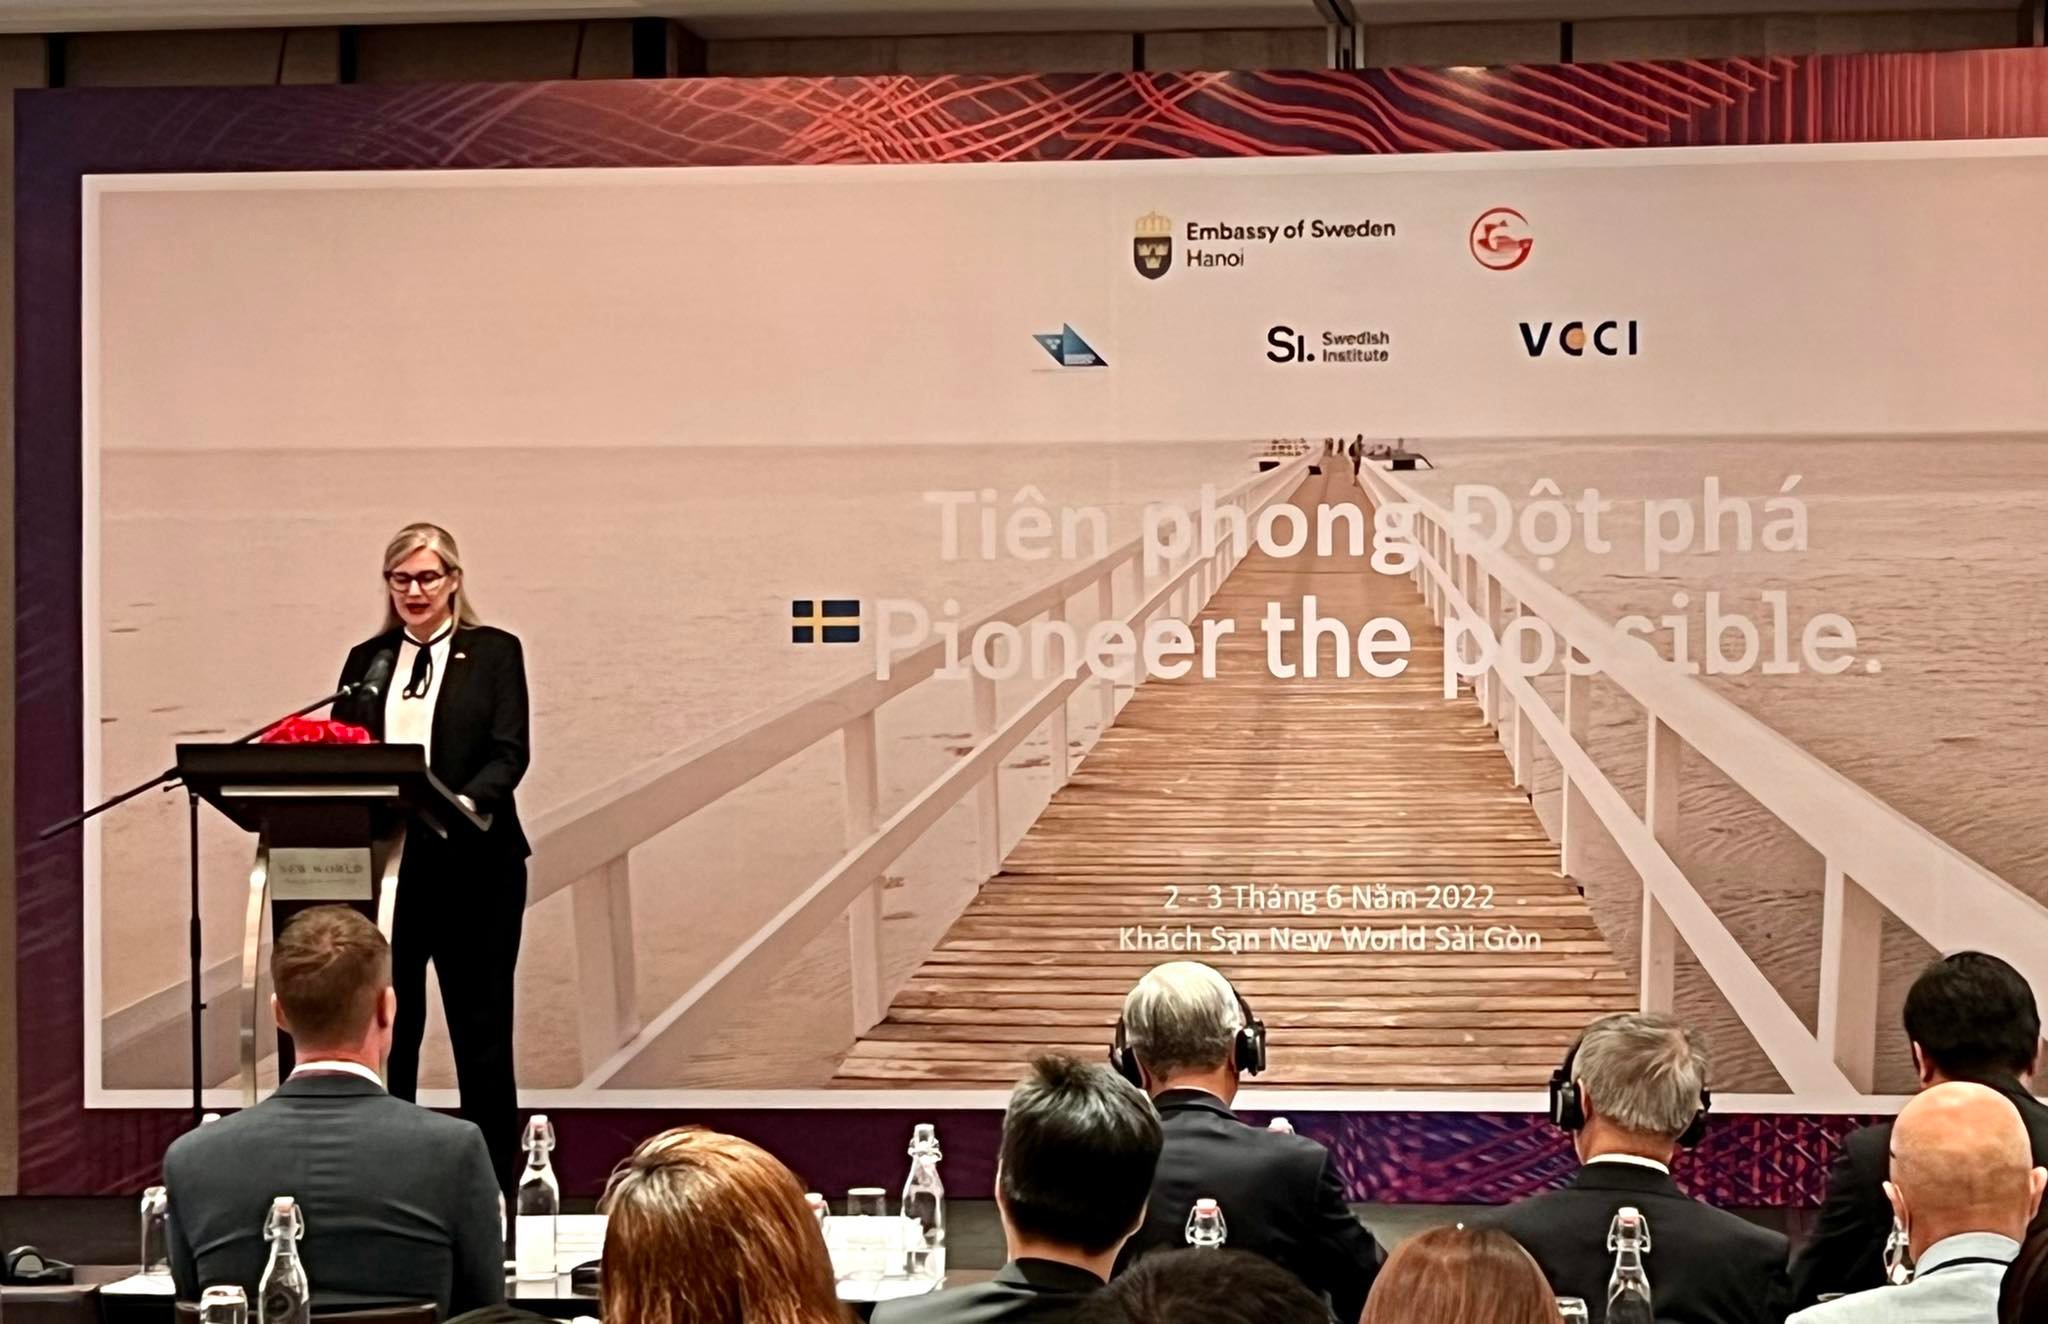 Swedish Ambassador to Vietnam Ann Måwe delivers an opening speech at the 'Pioneer the Possible' program in Ho Chi Minh City, June 2, 2022. Photo: Duy Khang / Tuoi Tre